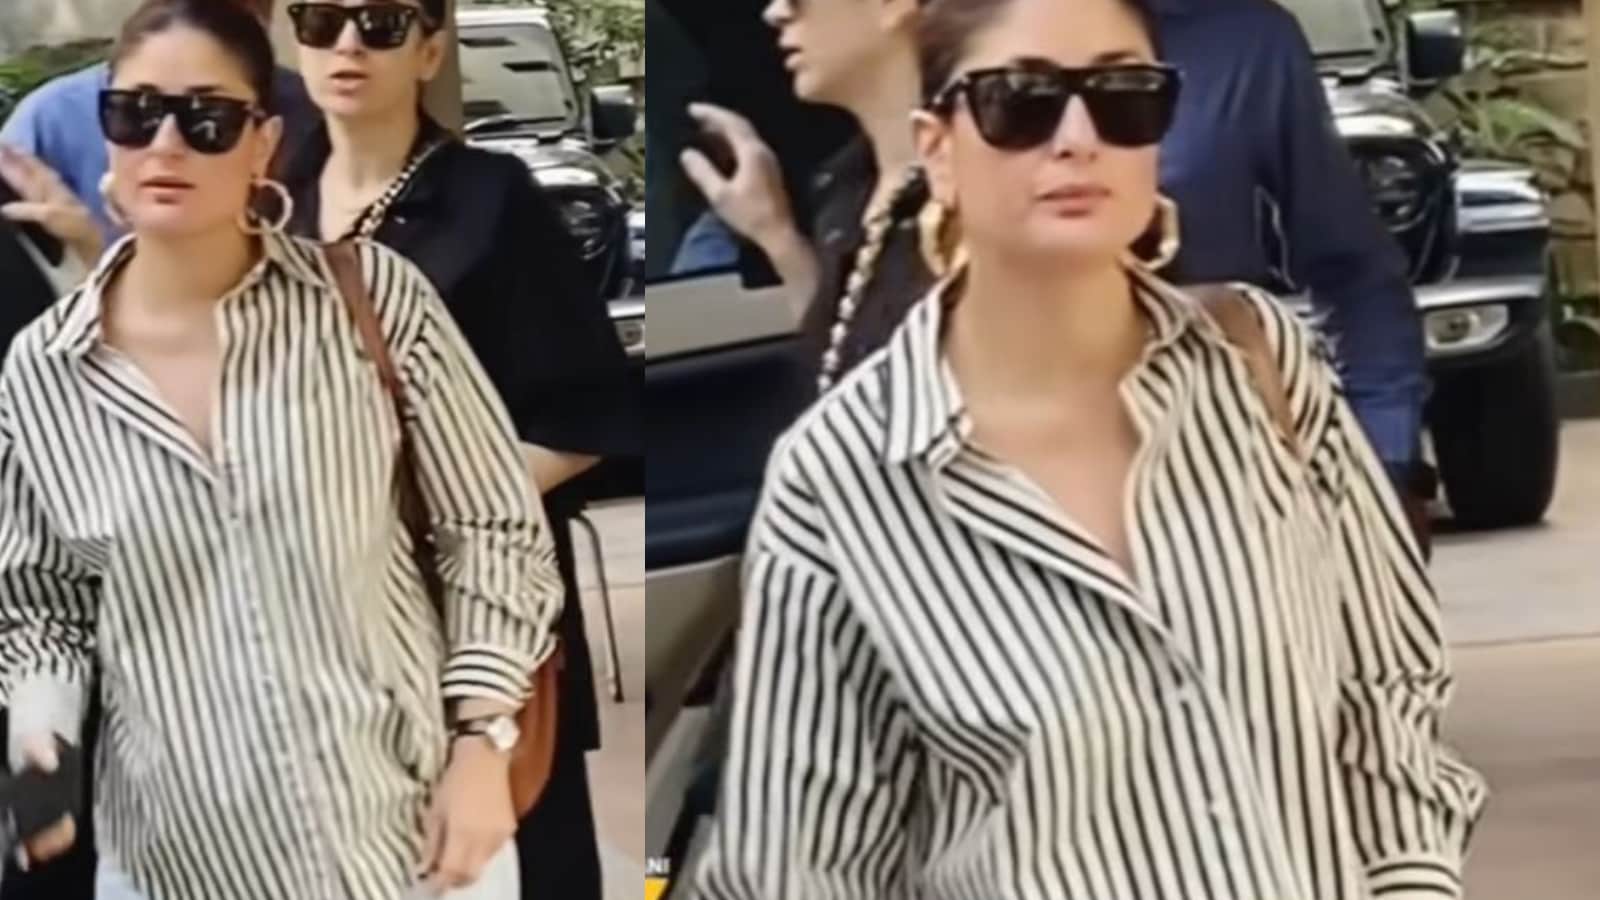 Deepika Padukone's airport look inspiration: White on white with a touch of  elegance - Watch